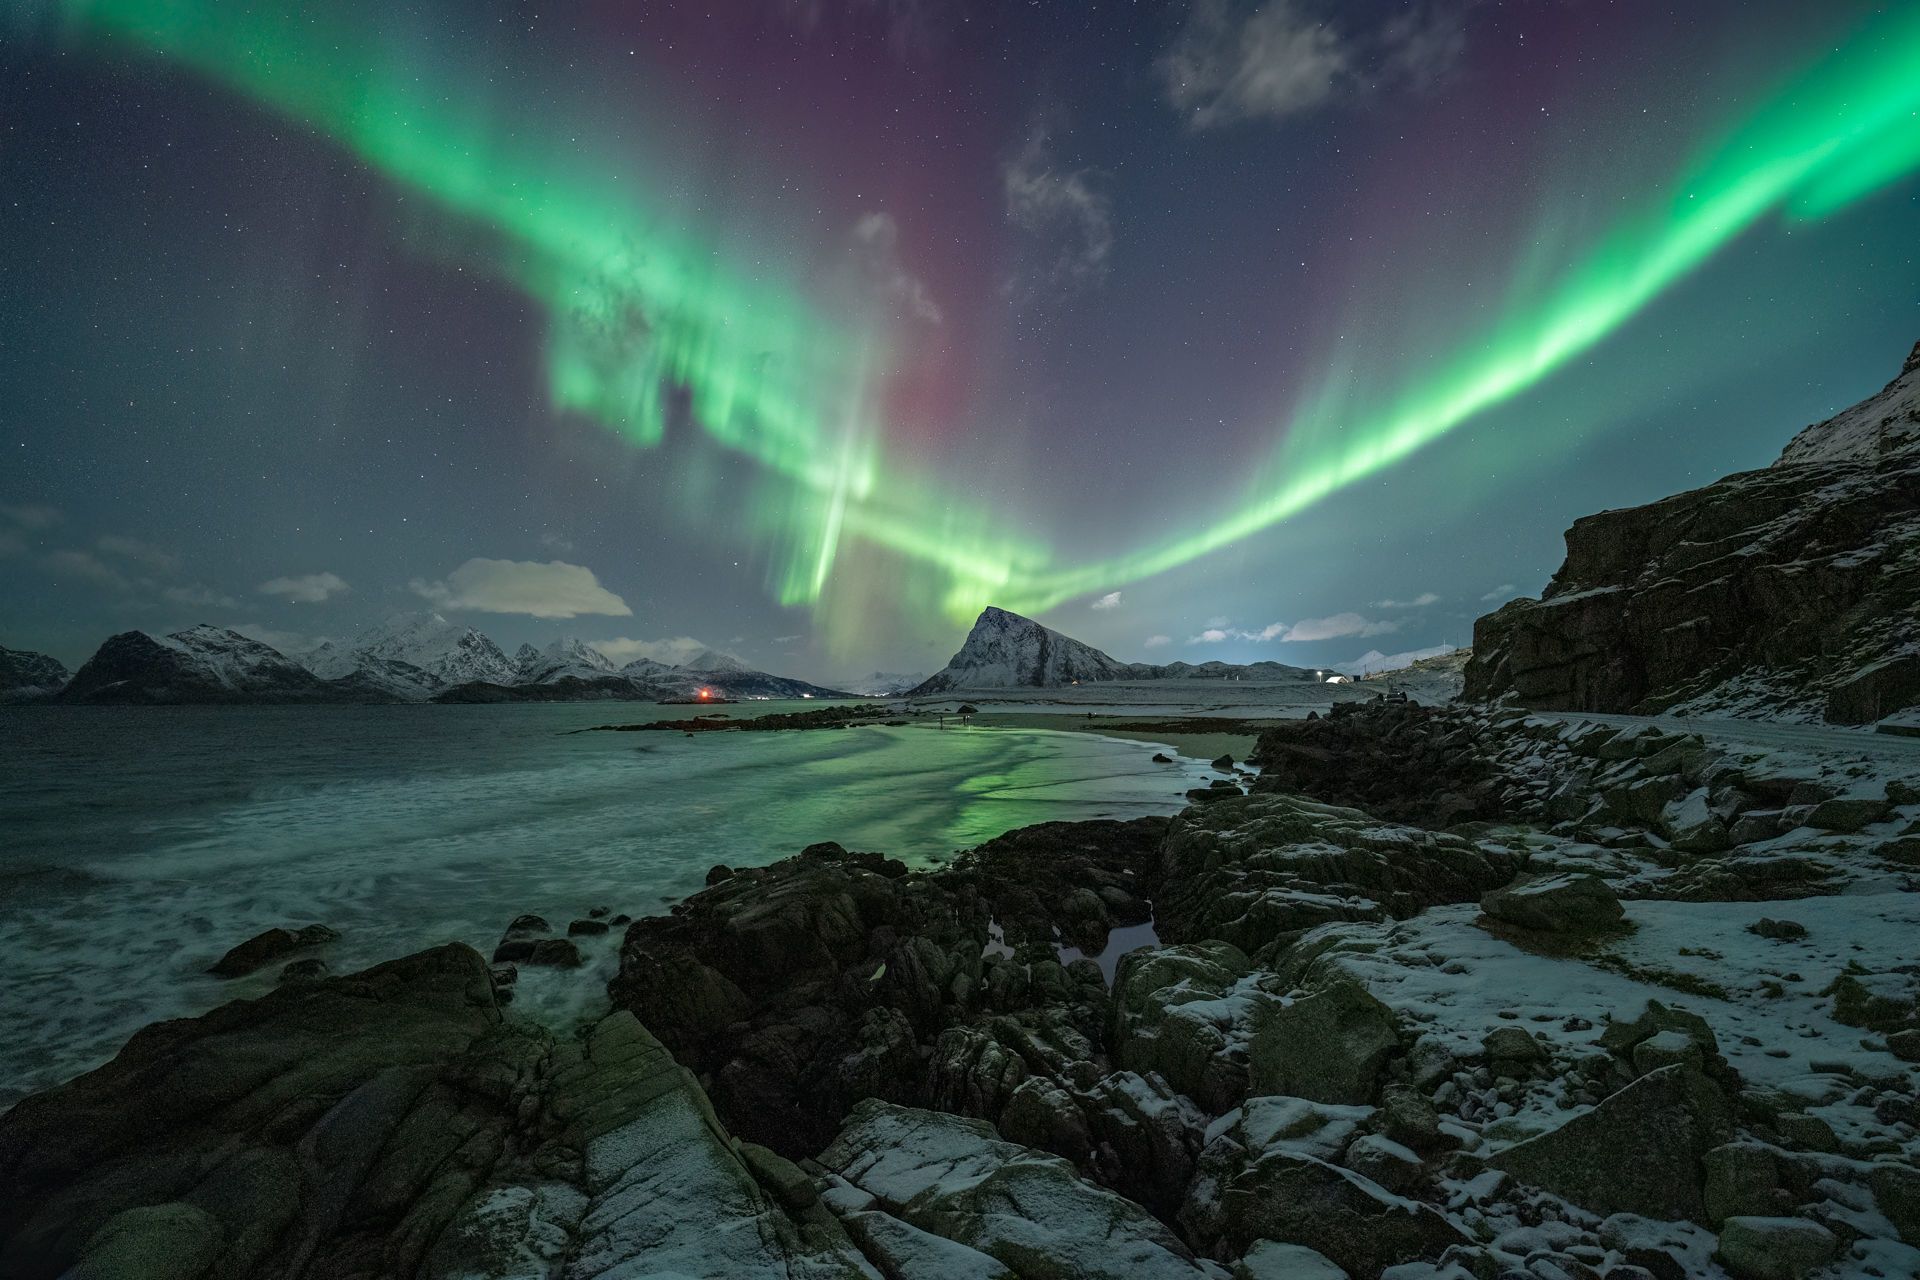 Best lenses to photograph the Northern Lights